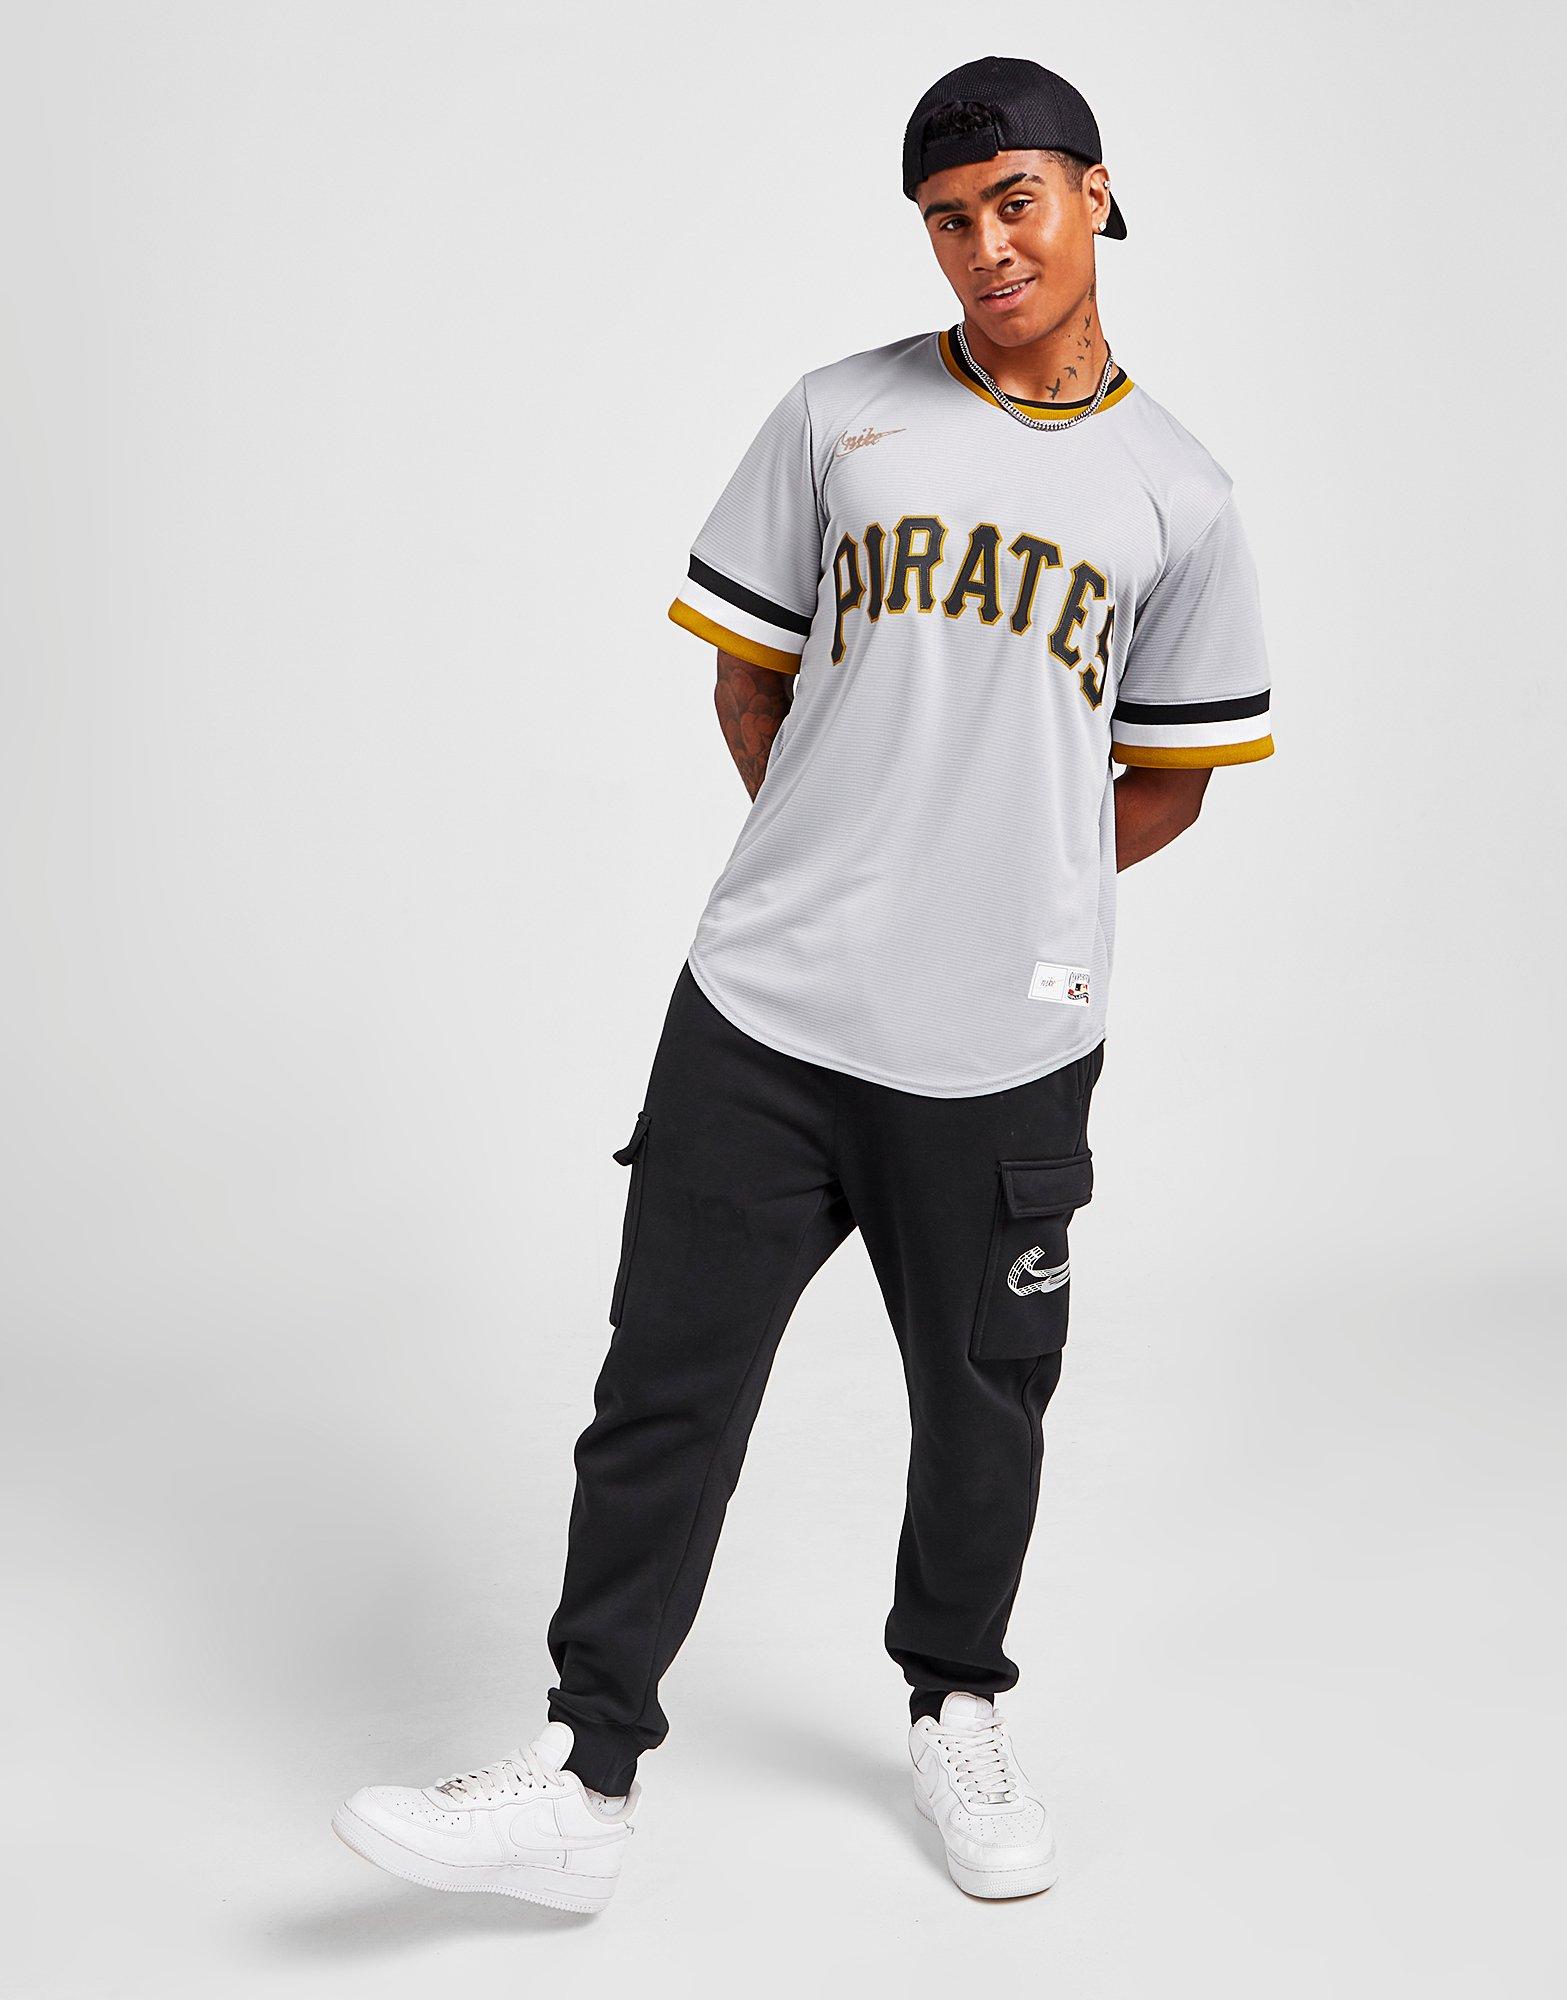 Pittsburgh Pirates Gray Road Jersey by Nike